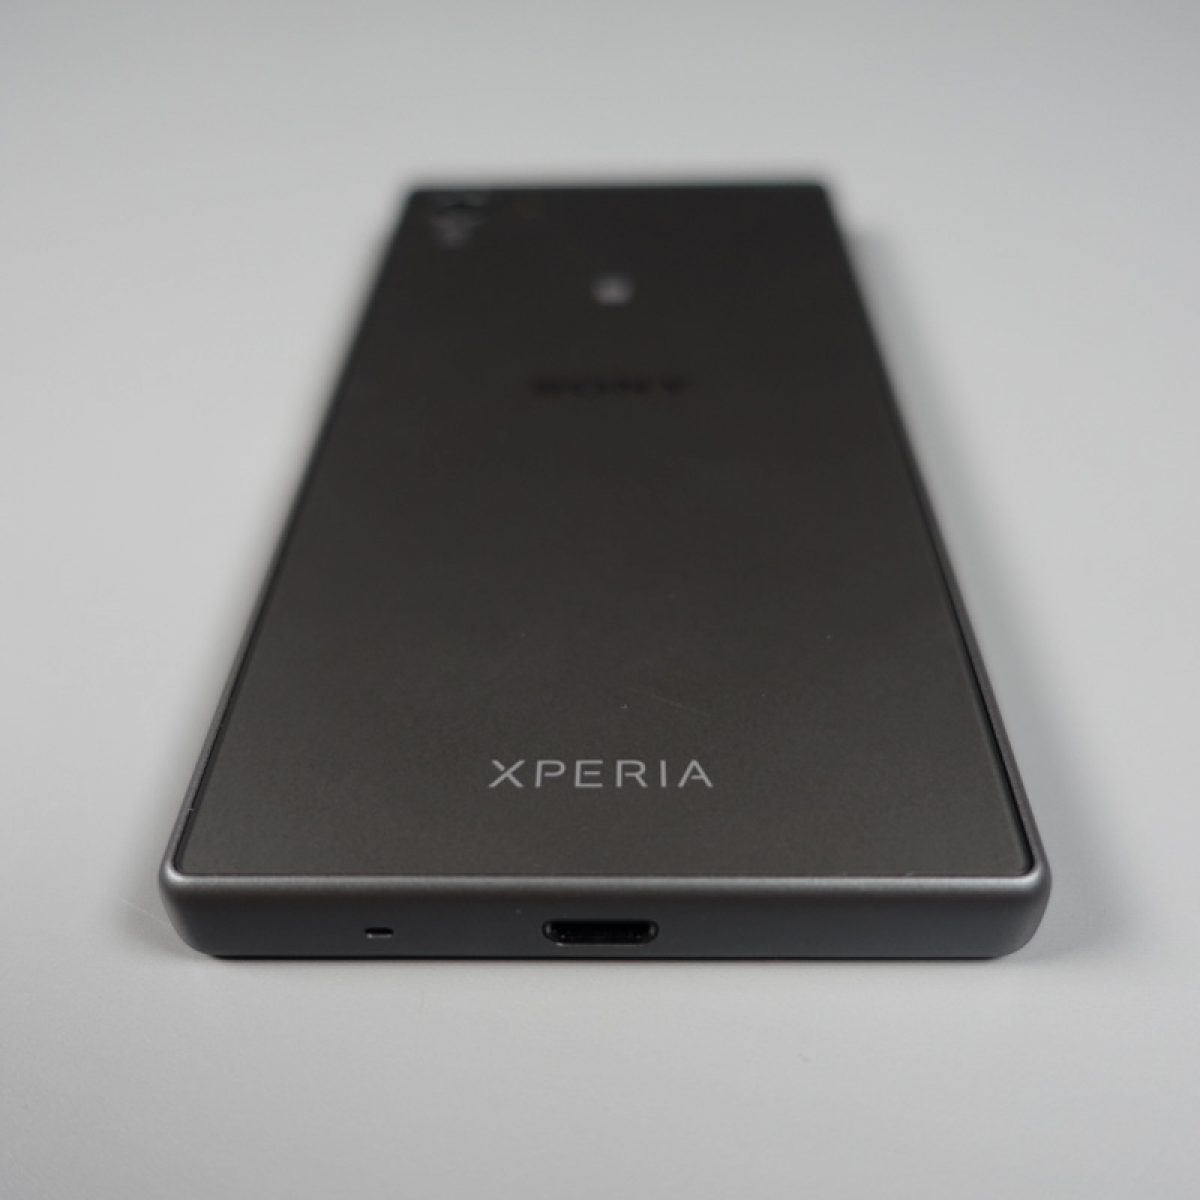 Sony Xperia Z5 Compact First Look Tour!